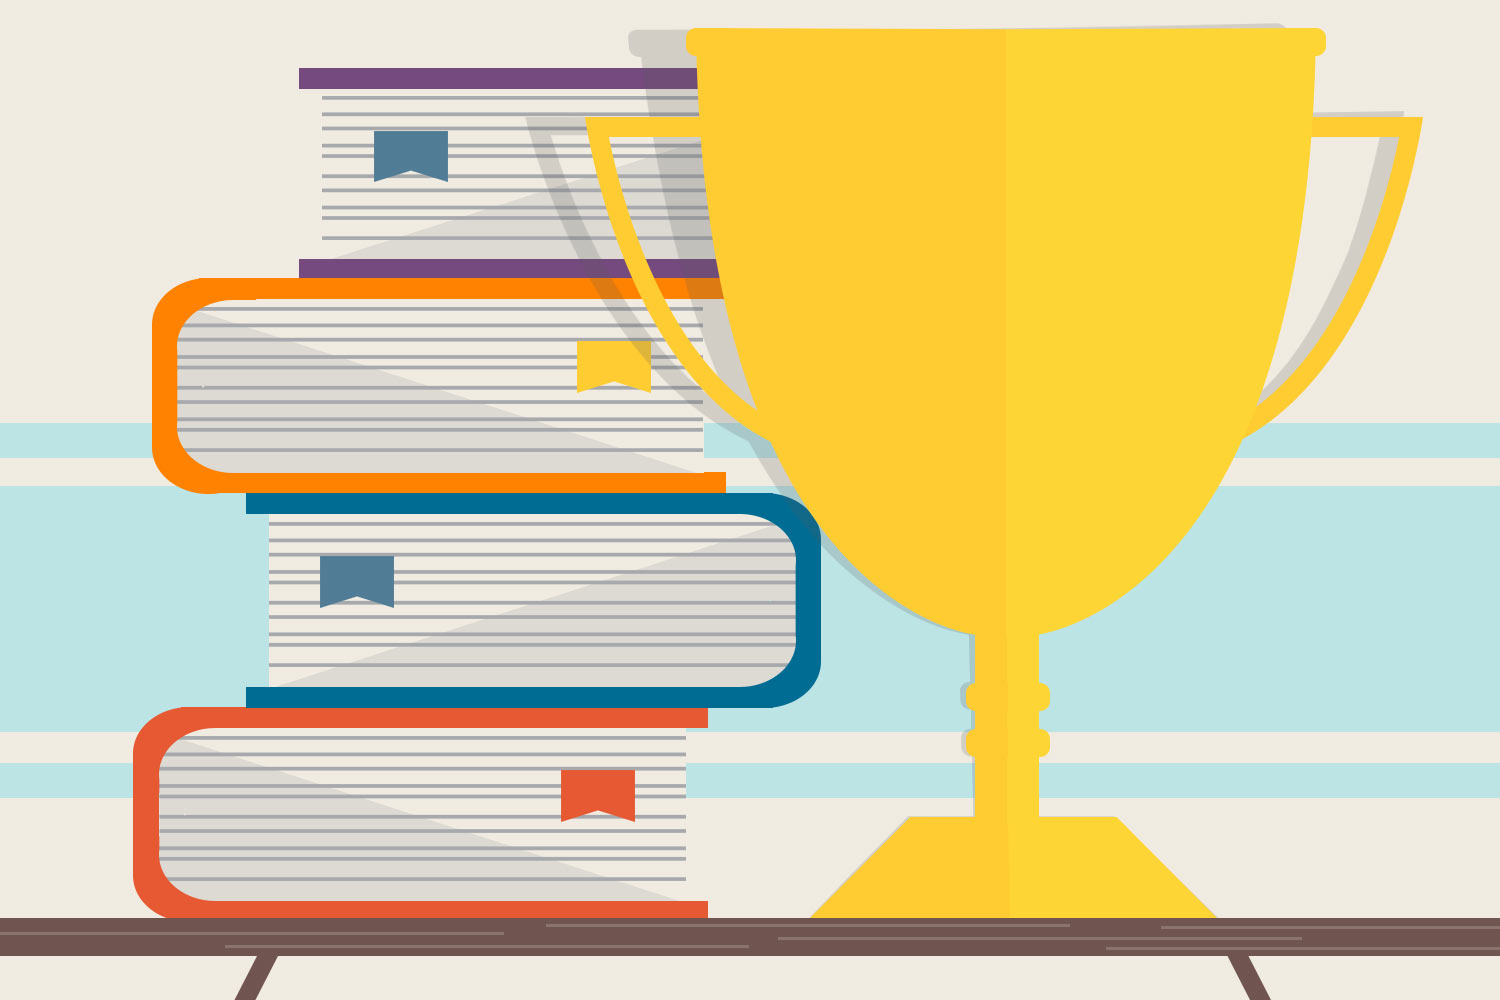 Illustration of a Trophy and Books